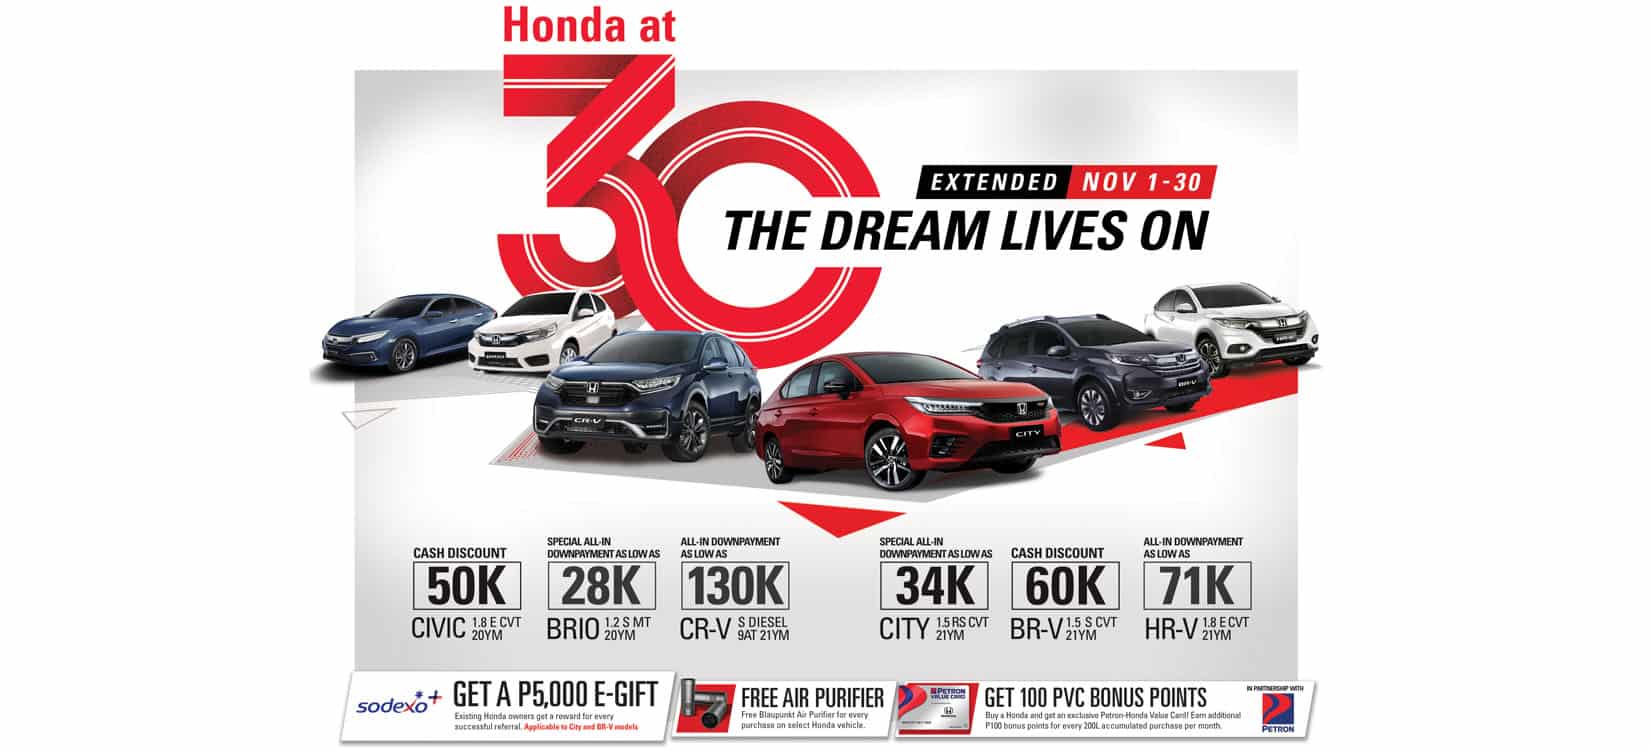 Honda Cars Philippines Honda Continues Its 30th Anniversary Celebration With Exciting Deals And Special Offerings This November